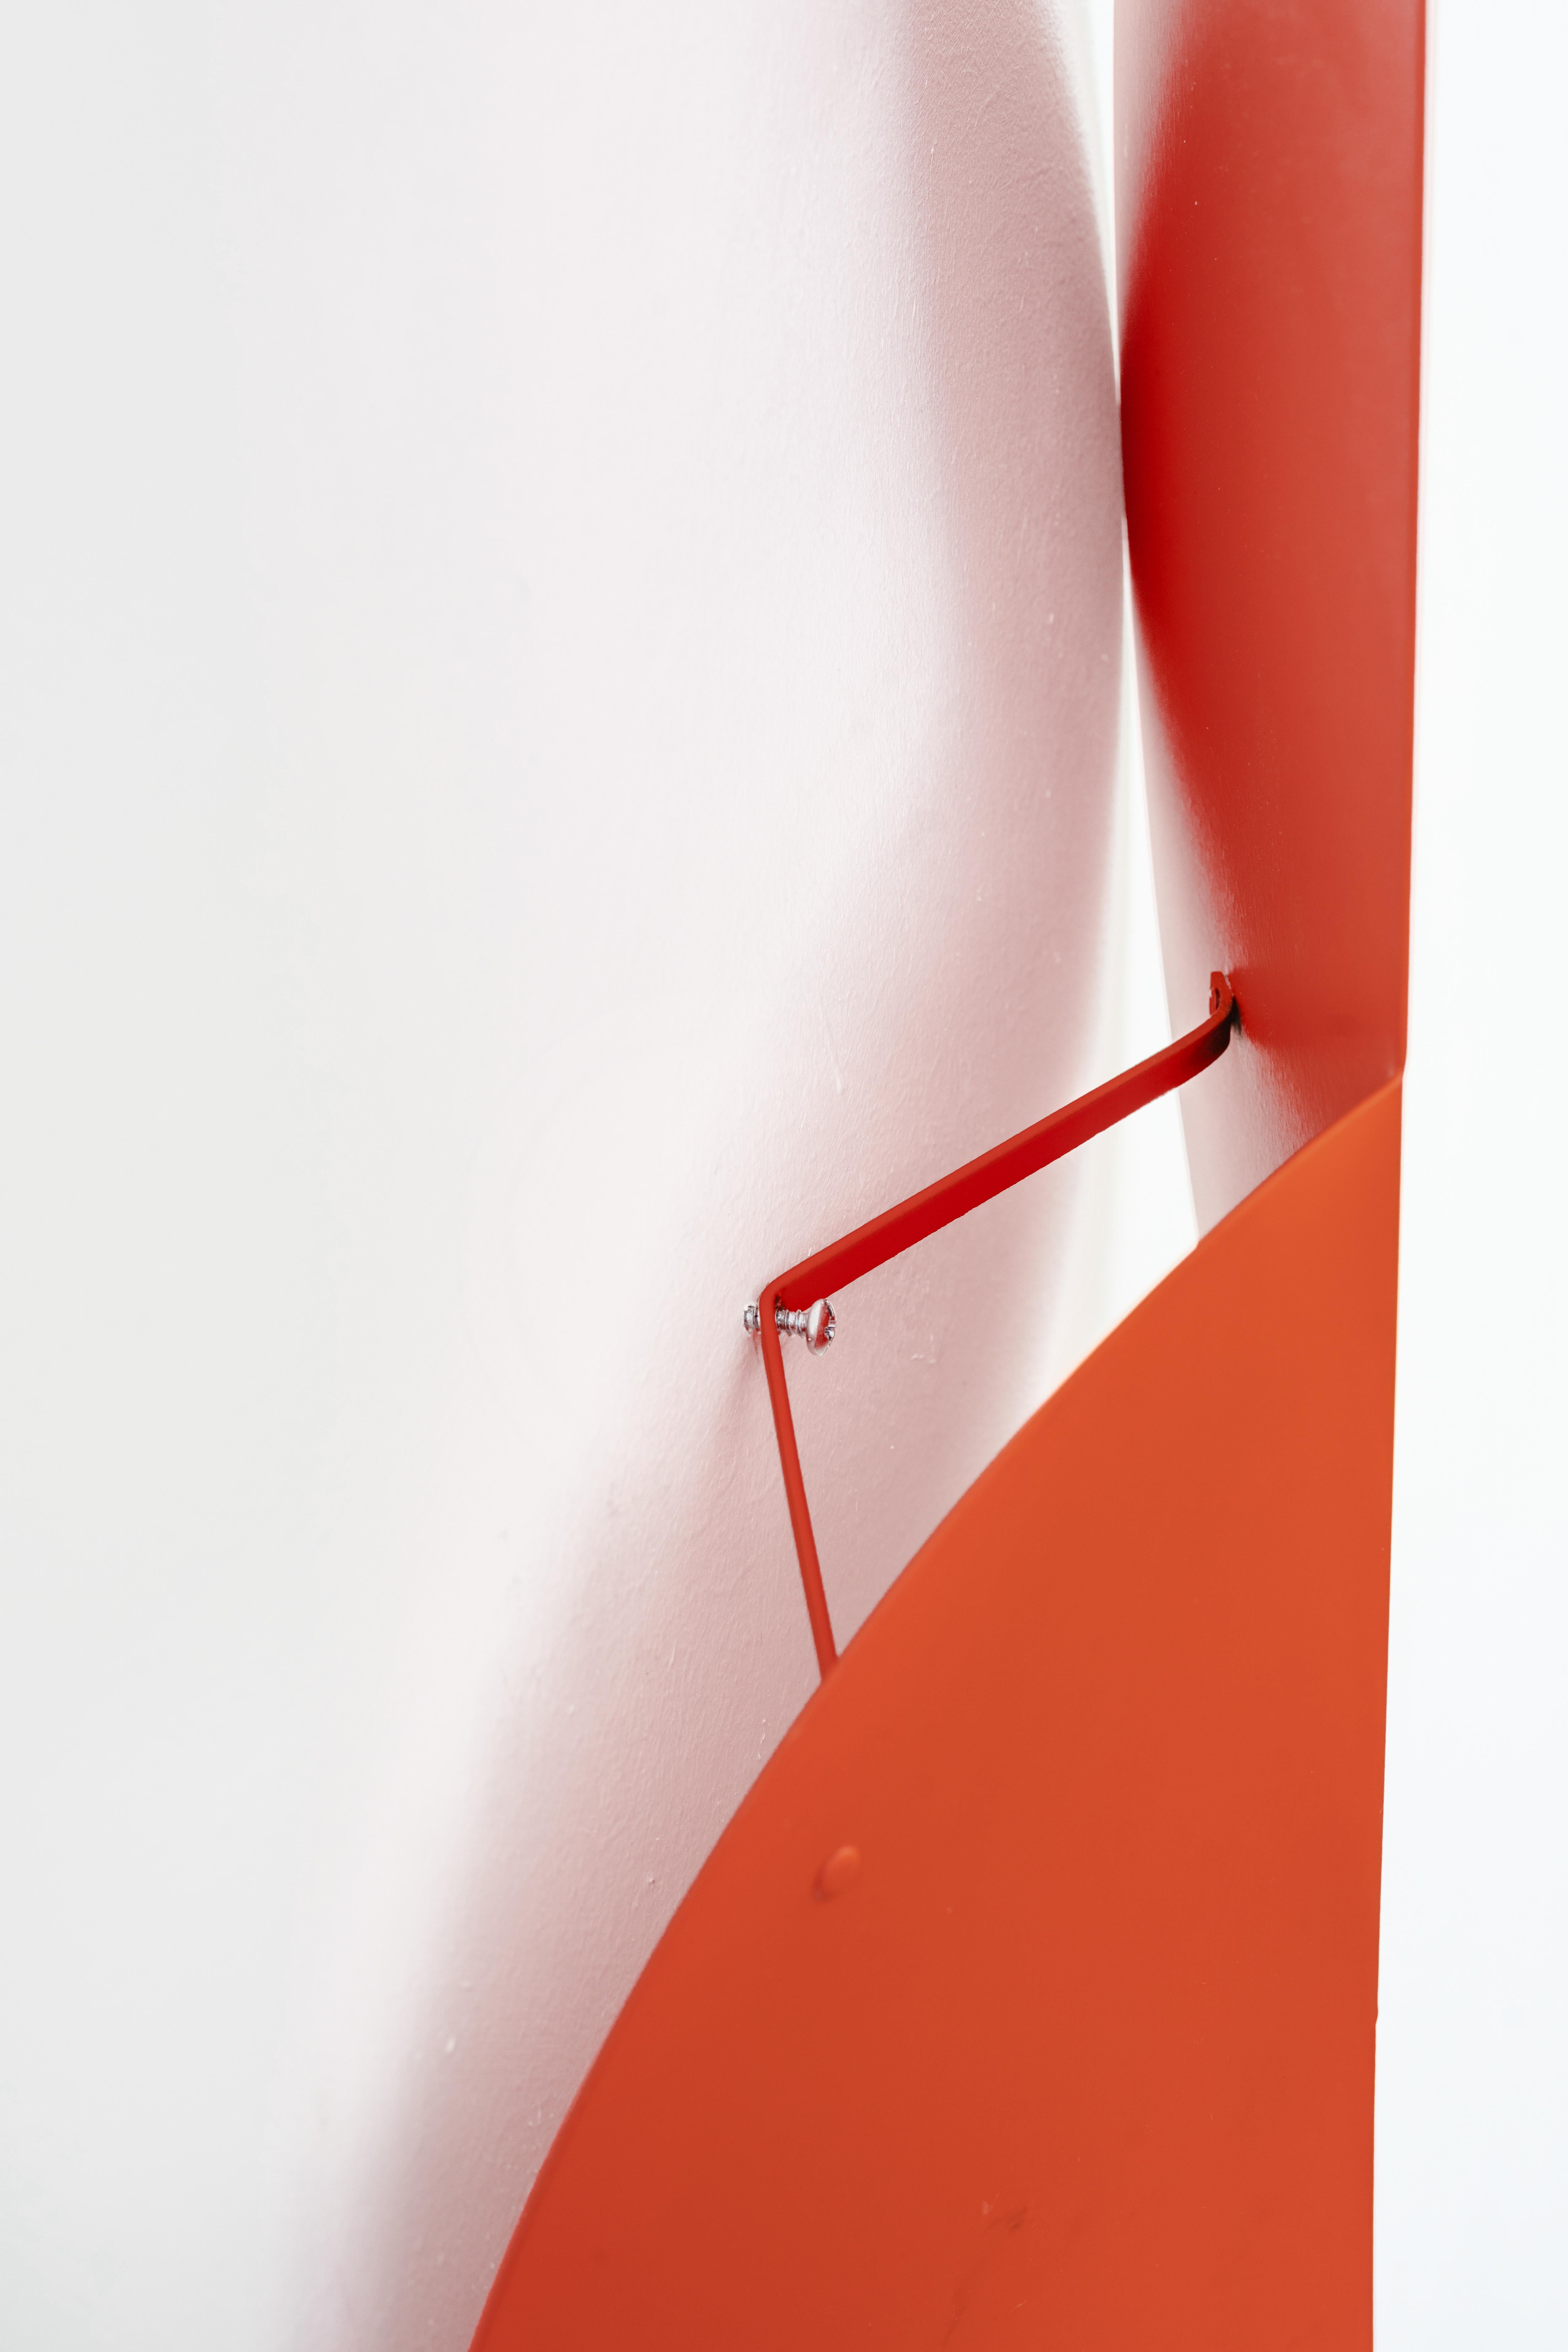 Bauhaus Two Fold Wall Hanging in Red For Sale